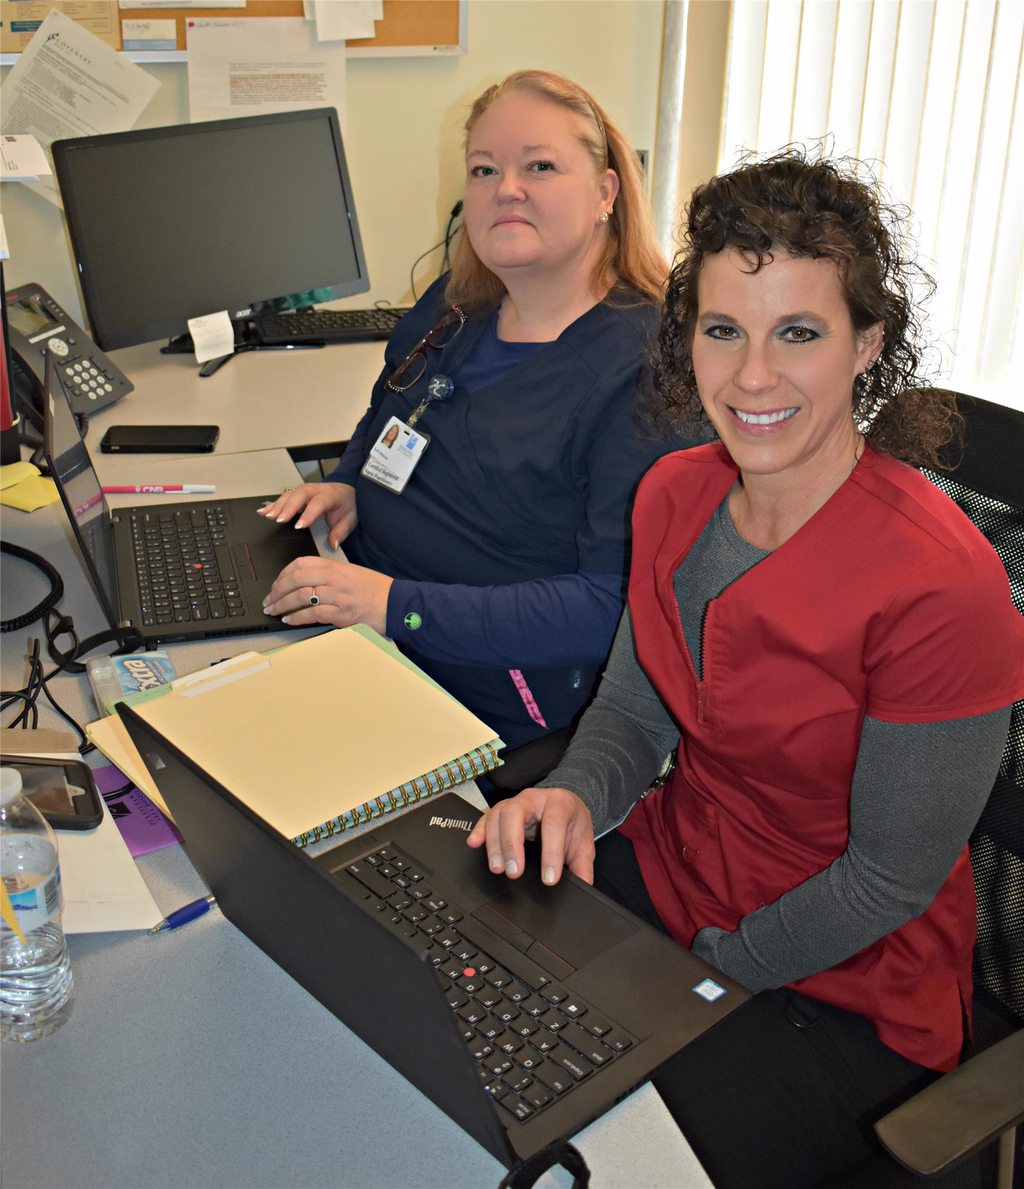 Two nurses sitting in front of computer getting picture taken